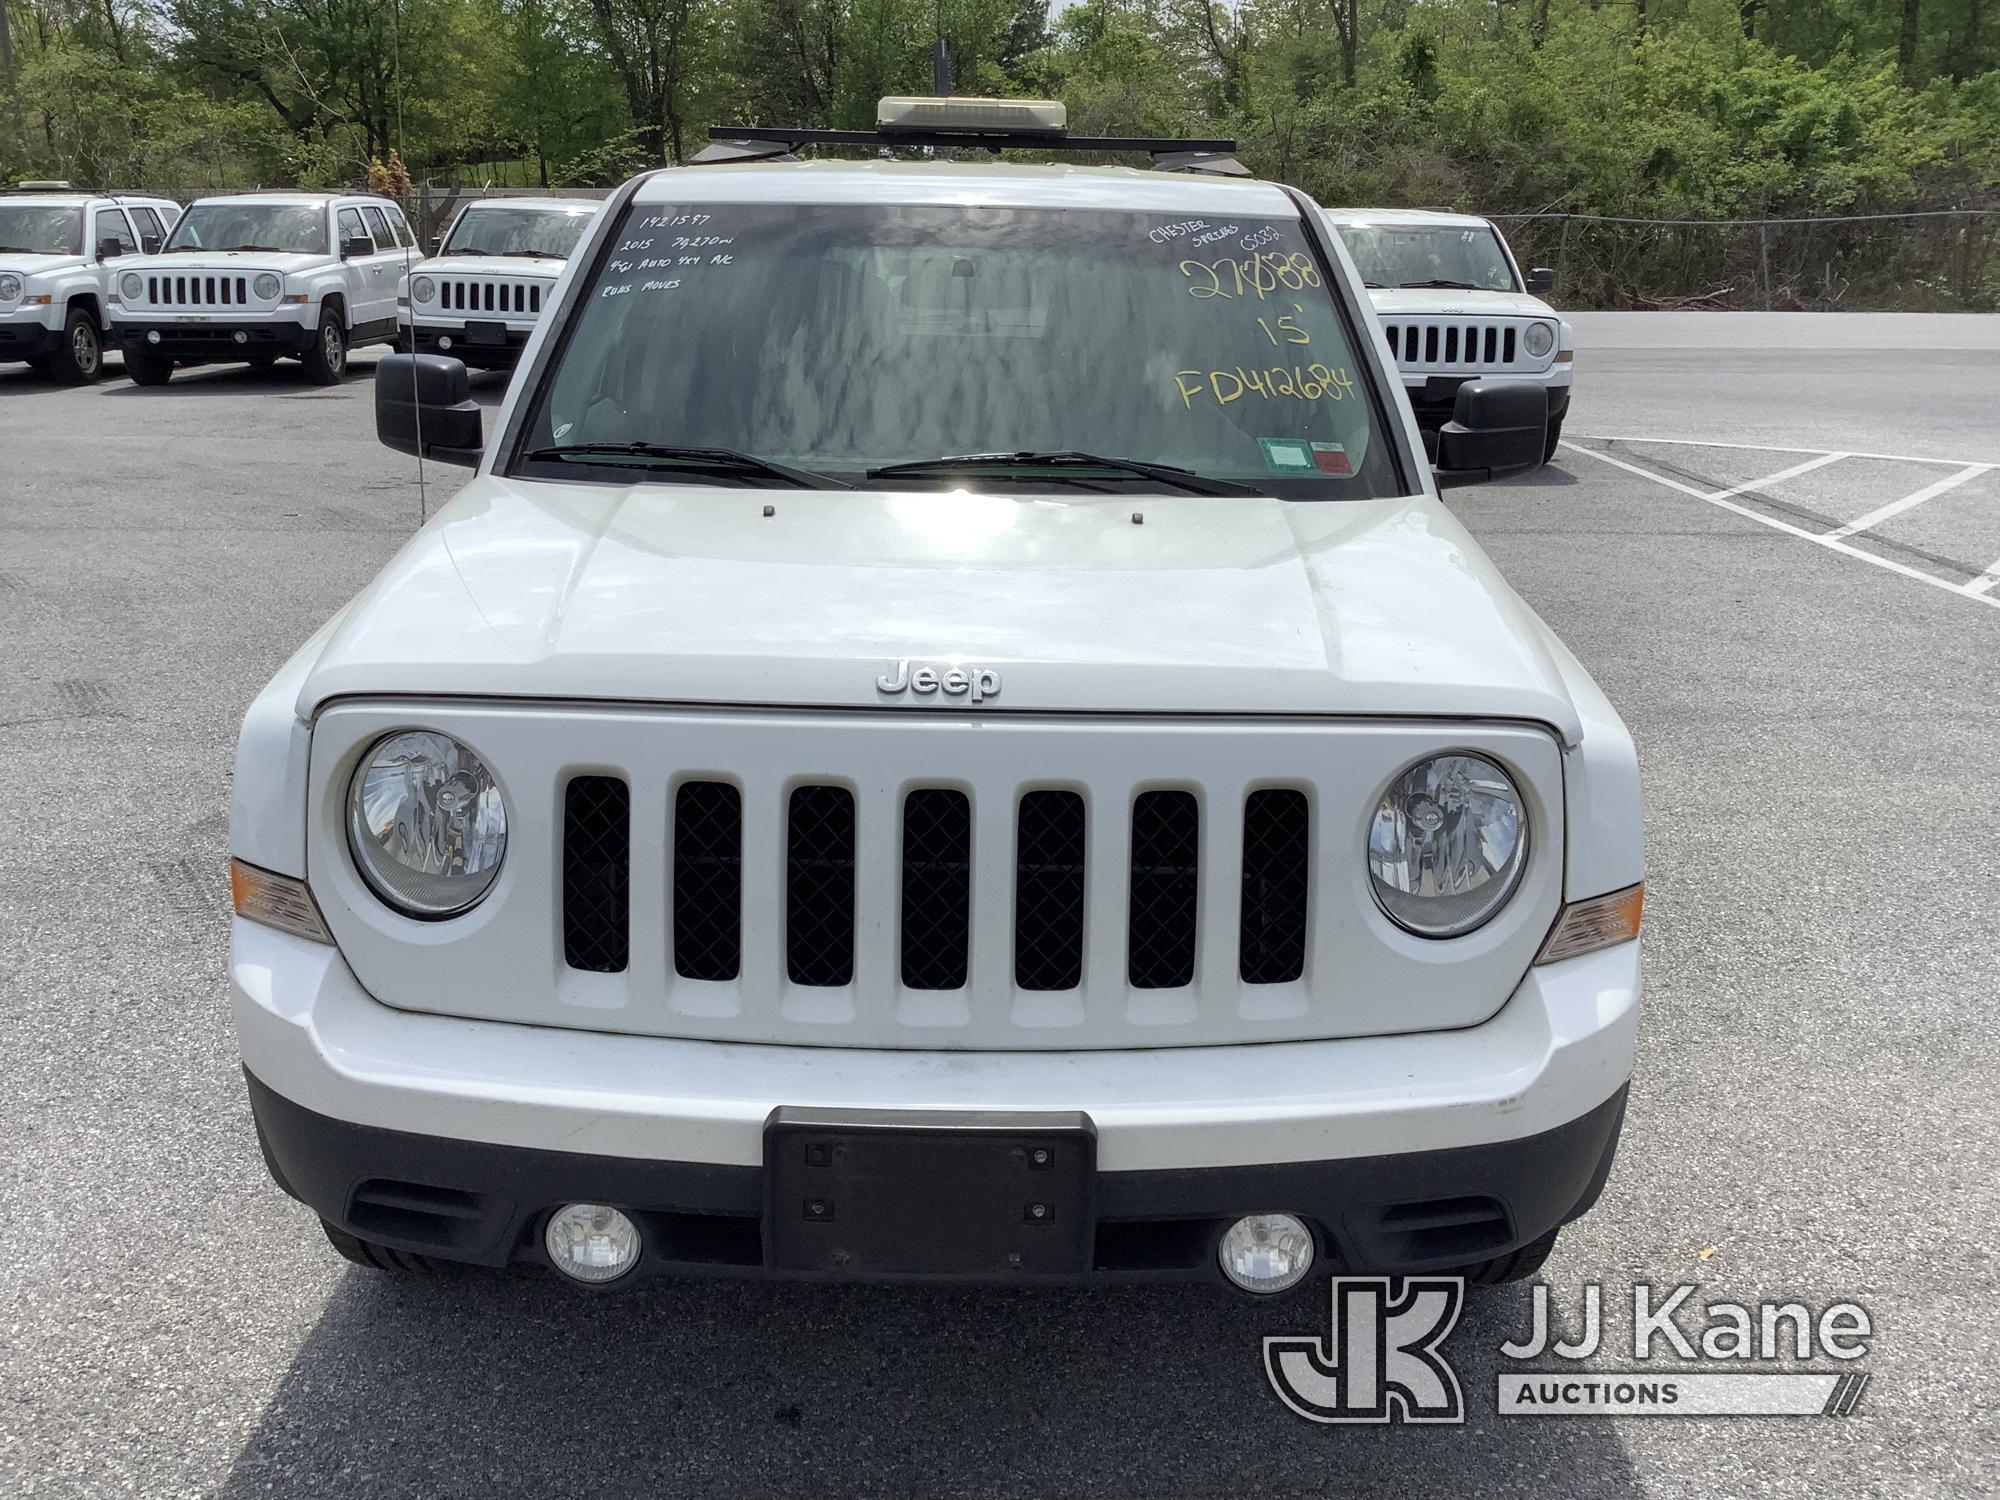 (Chester Springs, PA) 2015 Jeep Patriot 4x4 4-Door Sport Utility Vehicle Runs & Moves, Body & Rust D